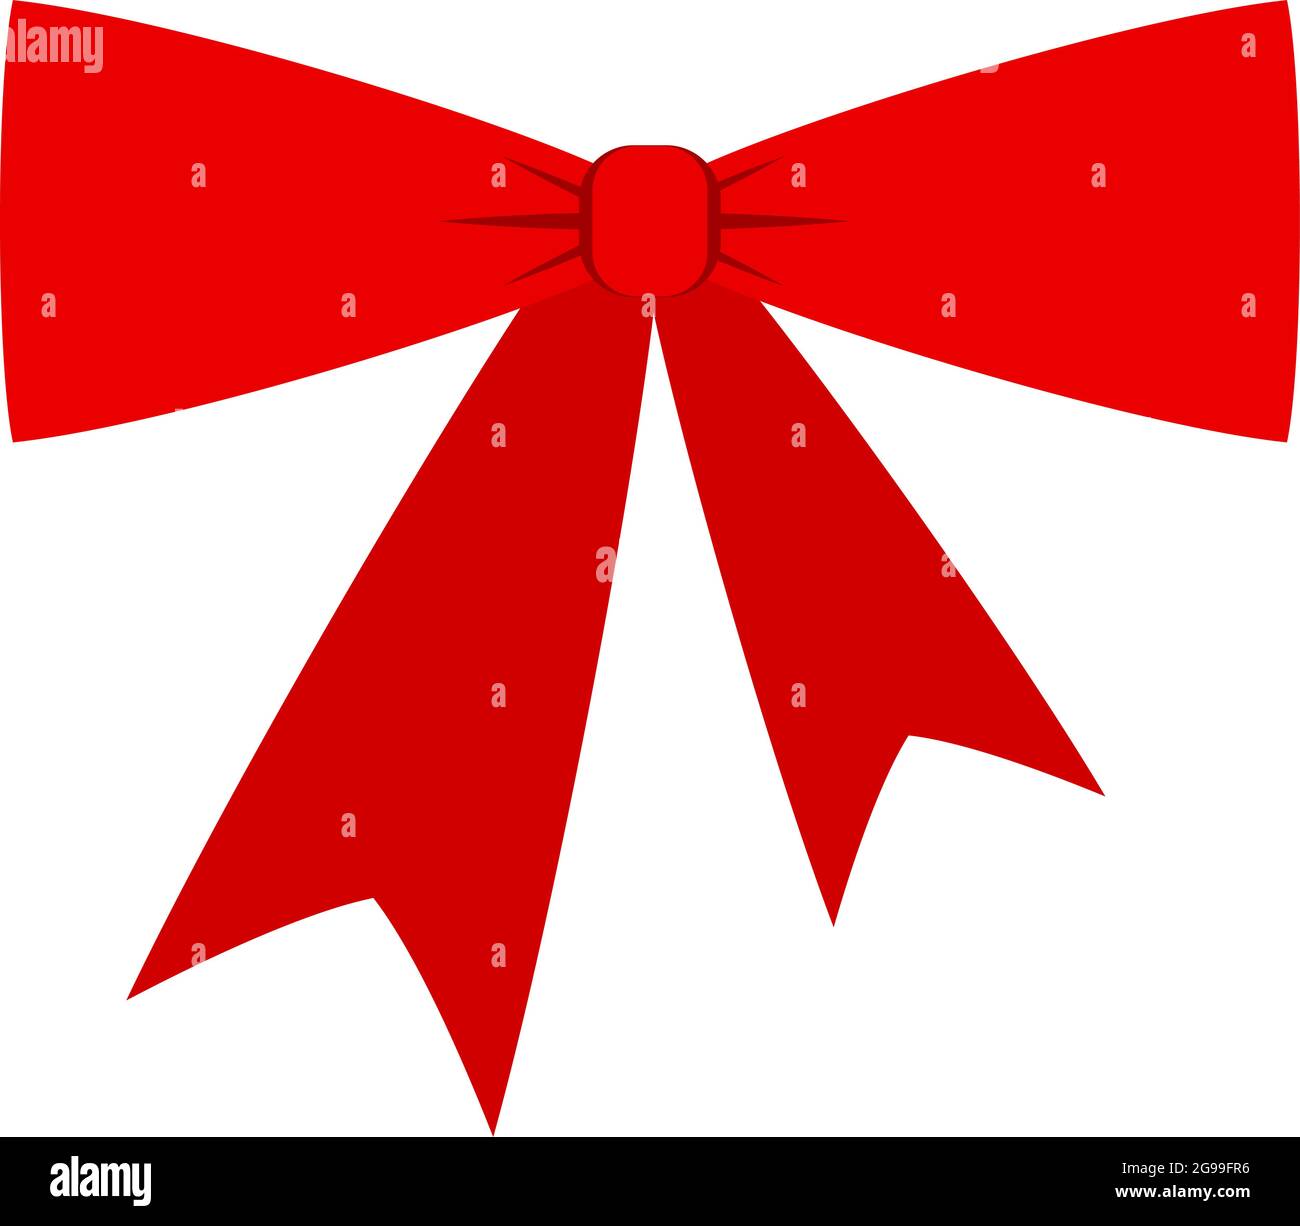 Decorative festive red bow. Icon for greeting cards. Stock Vector